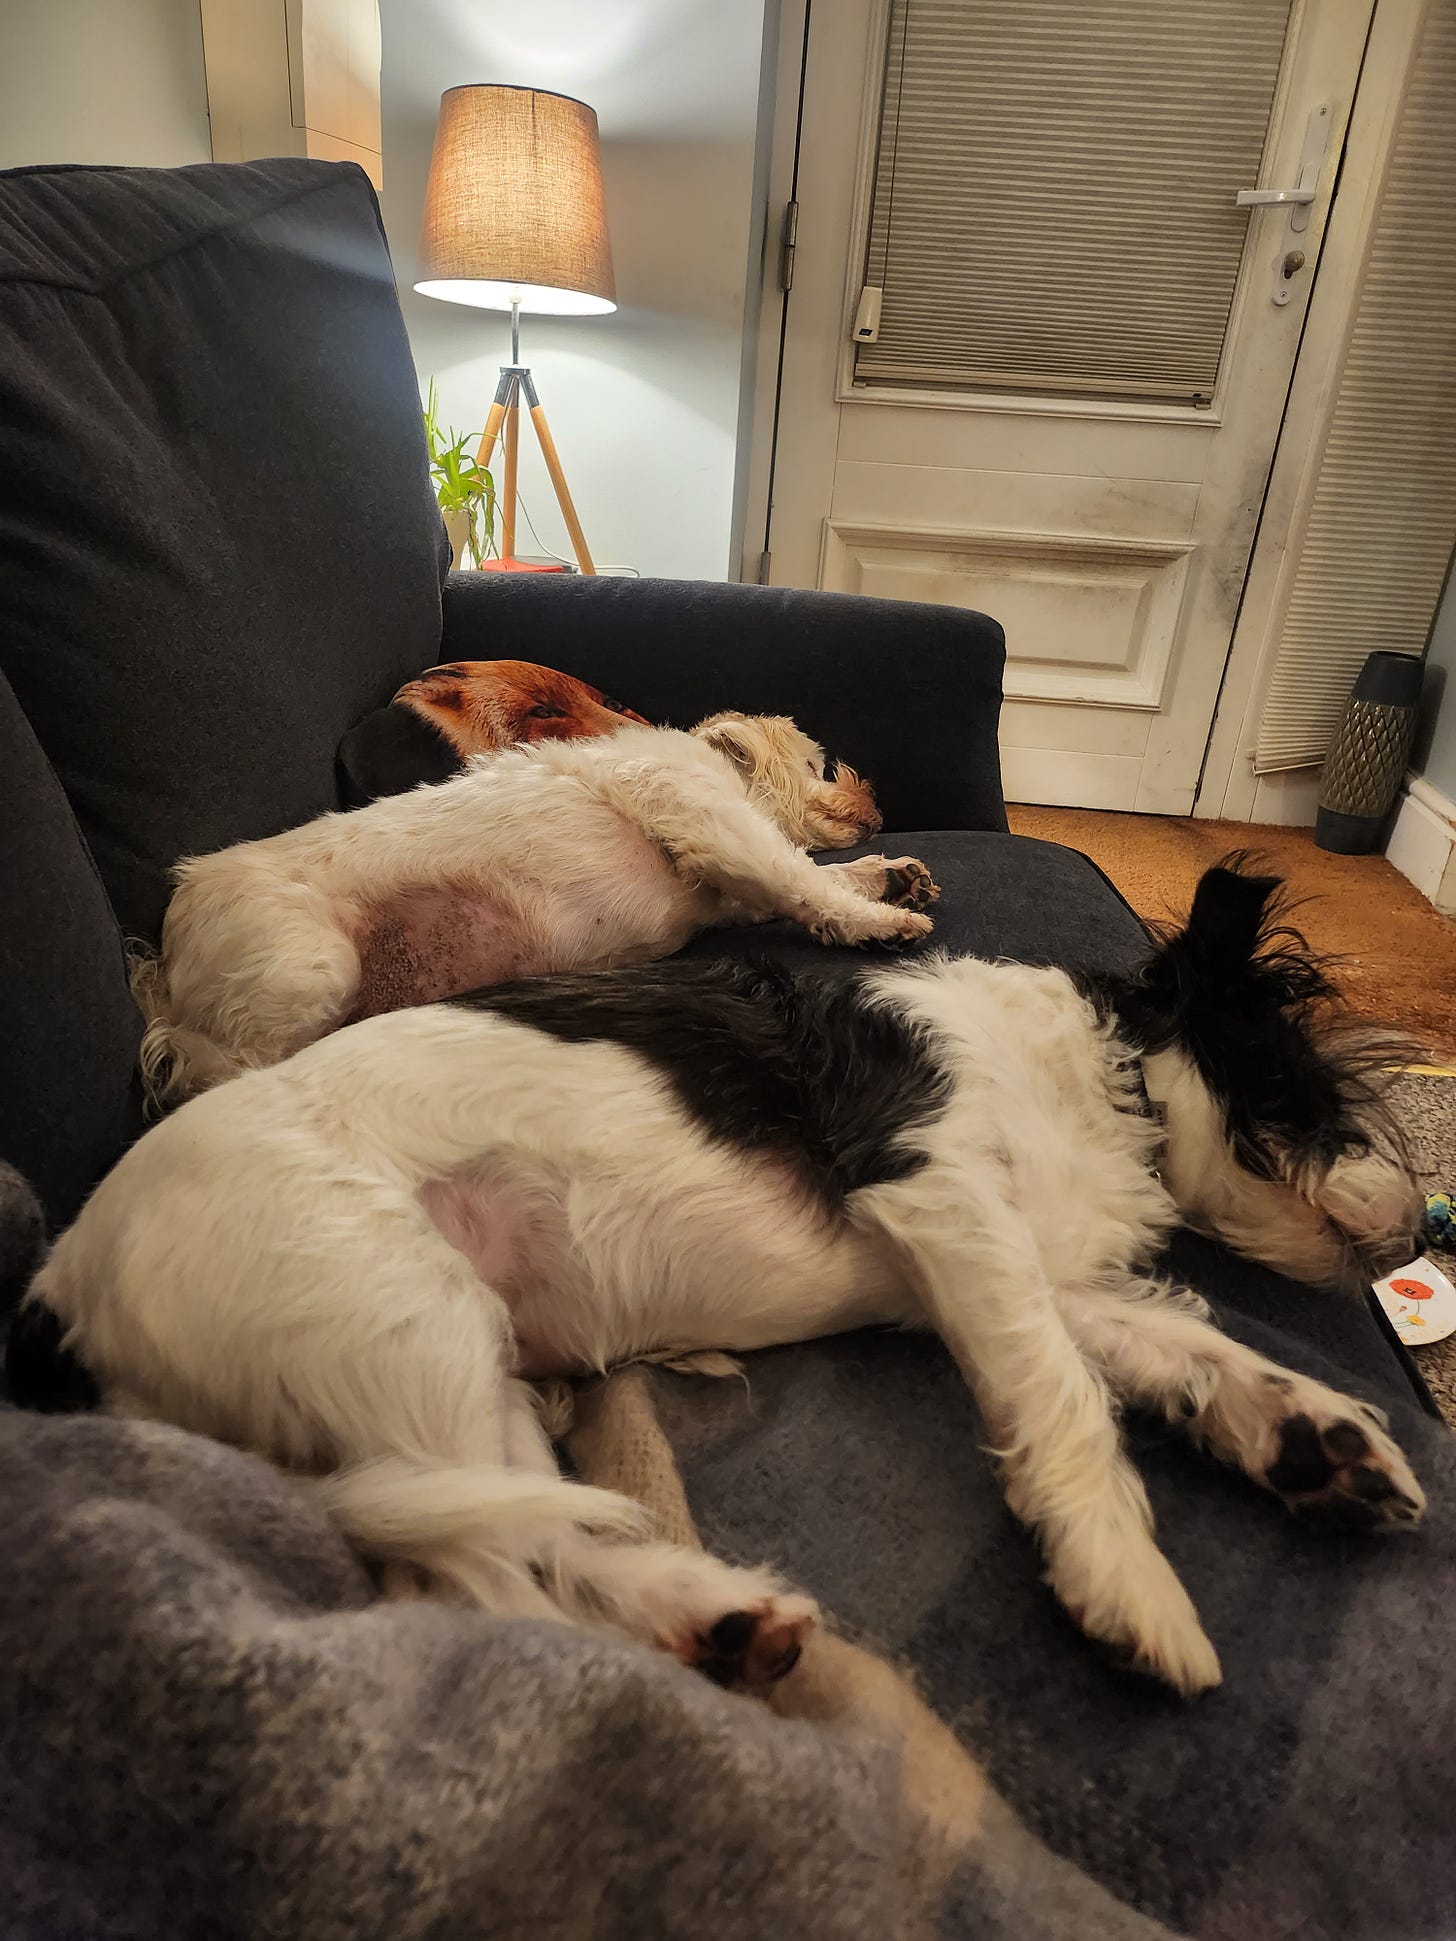 On a blue couch, two terriers (one white and brown, the other white and black) lie outstretched and are deep asleep. They are thriving in their snoozes. 